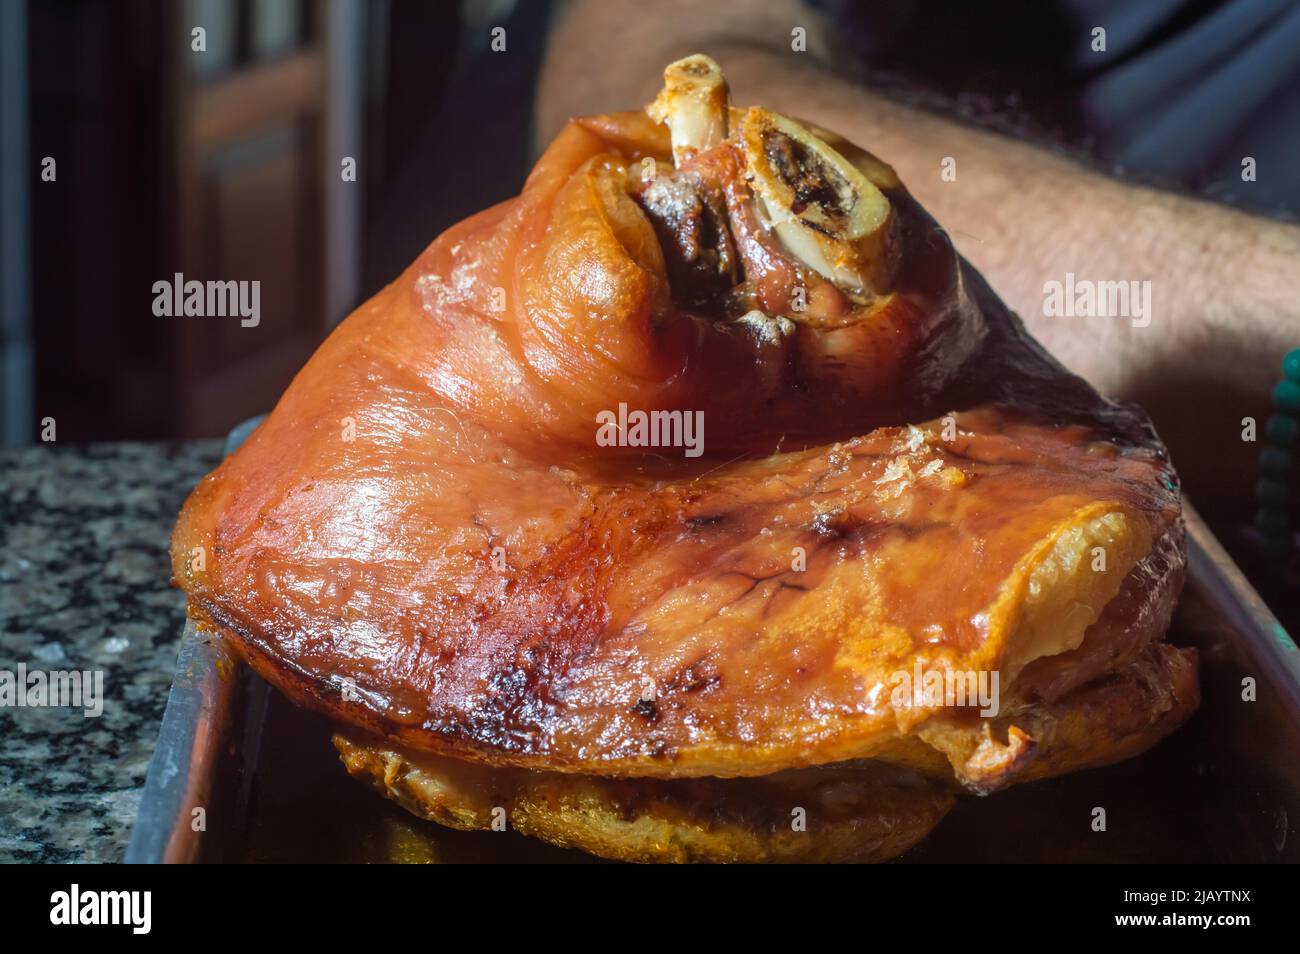 Roasted pork knuckle eisbein with cabbage and mustard on wooden cutting board. Stock Photo